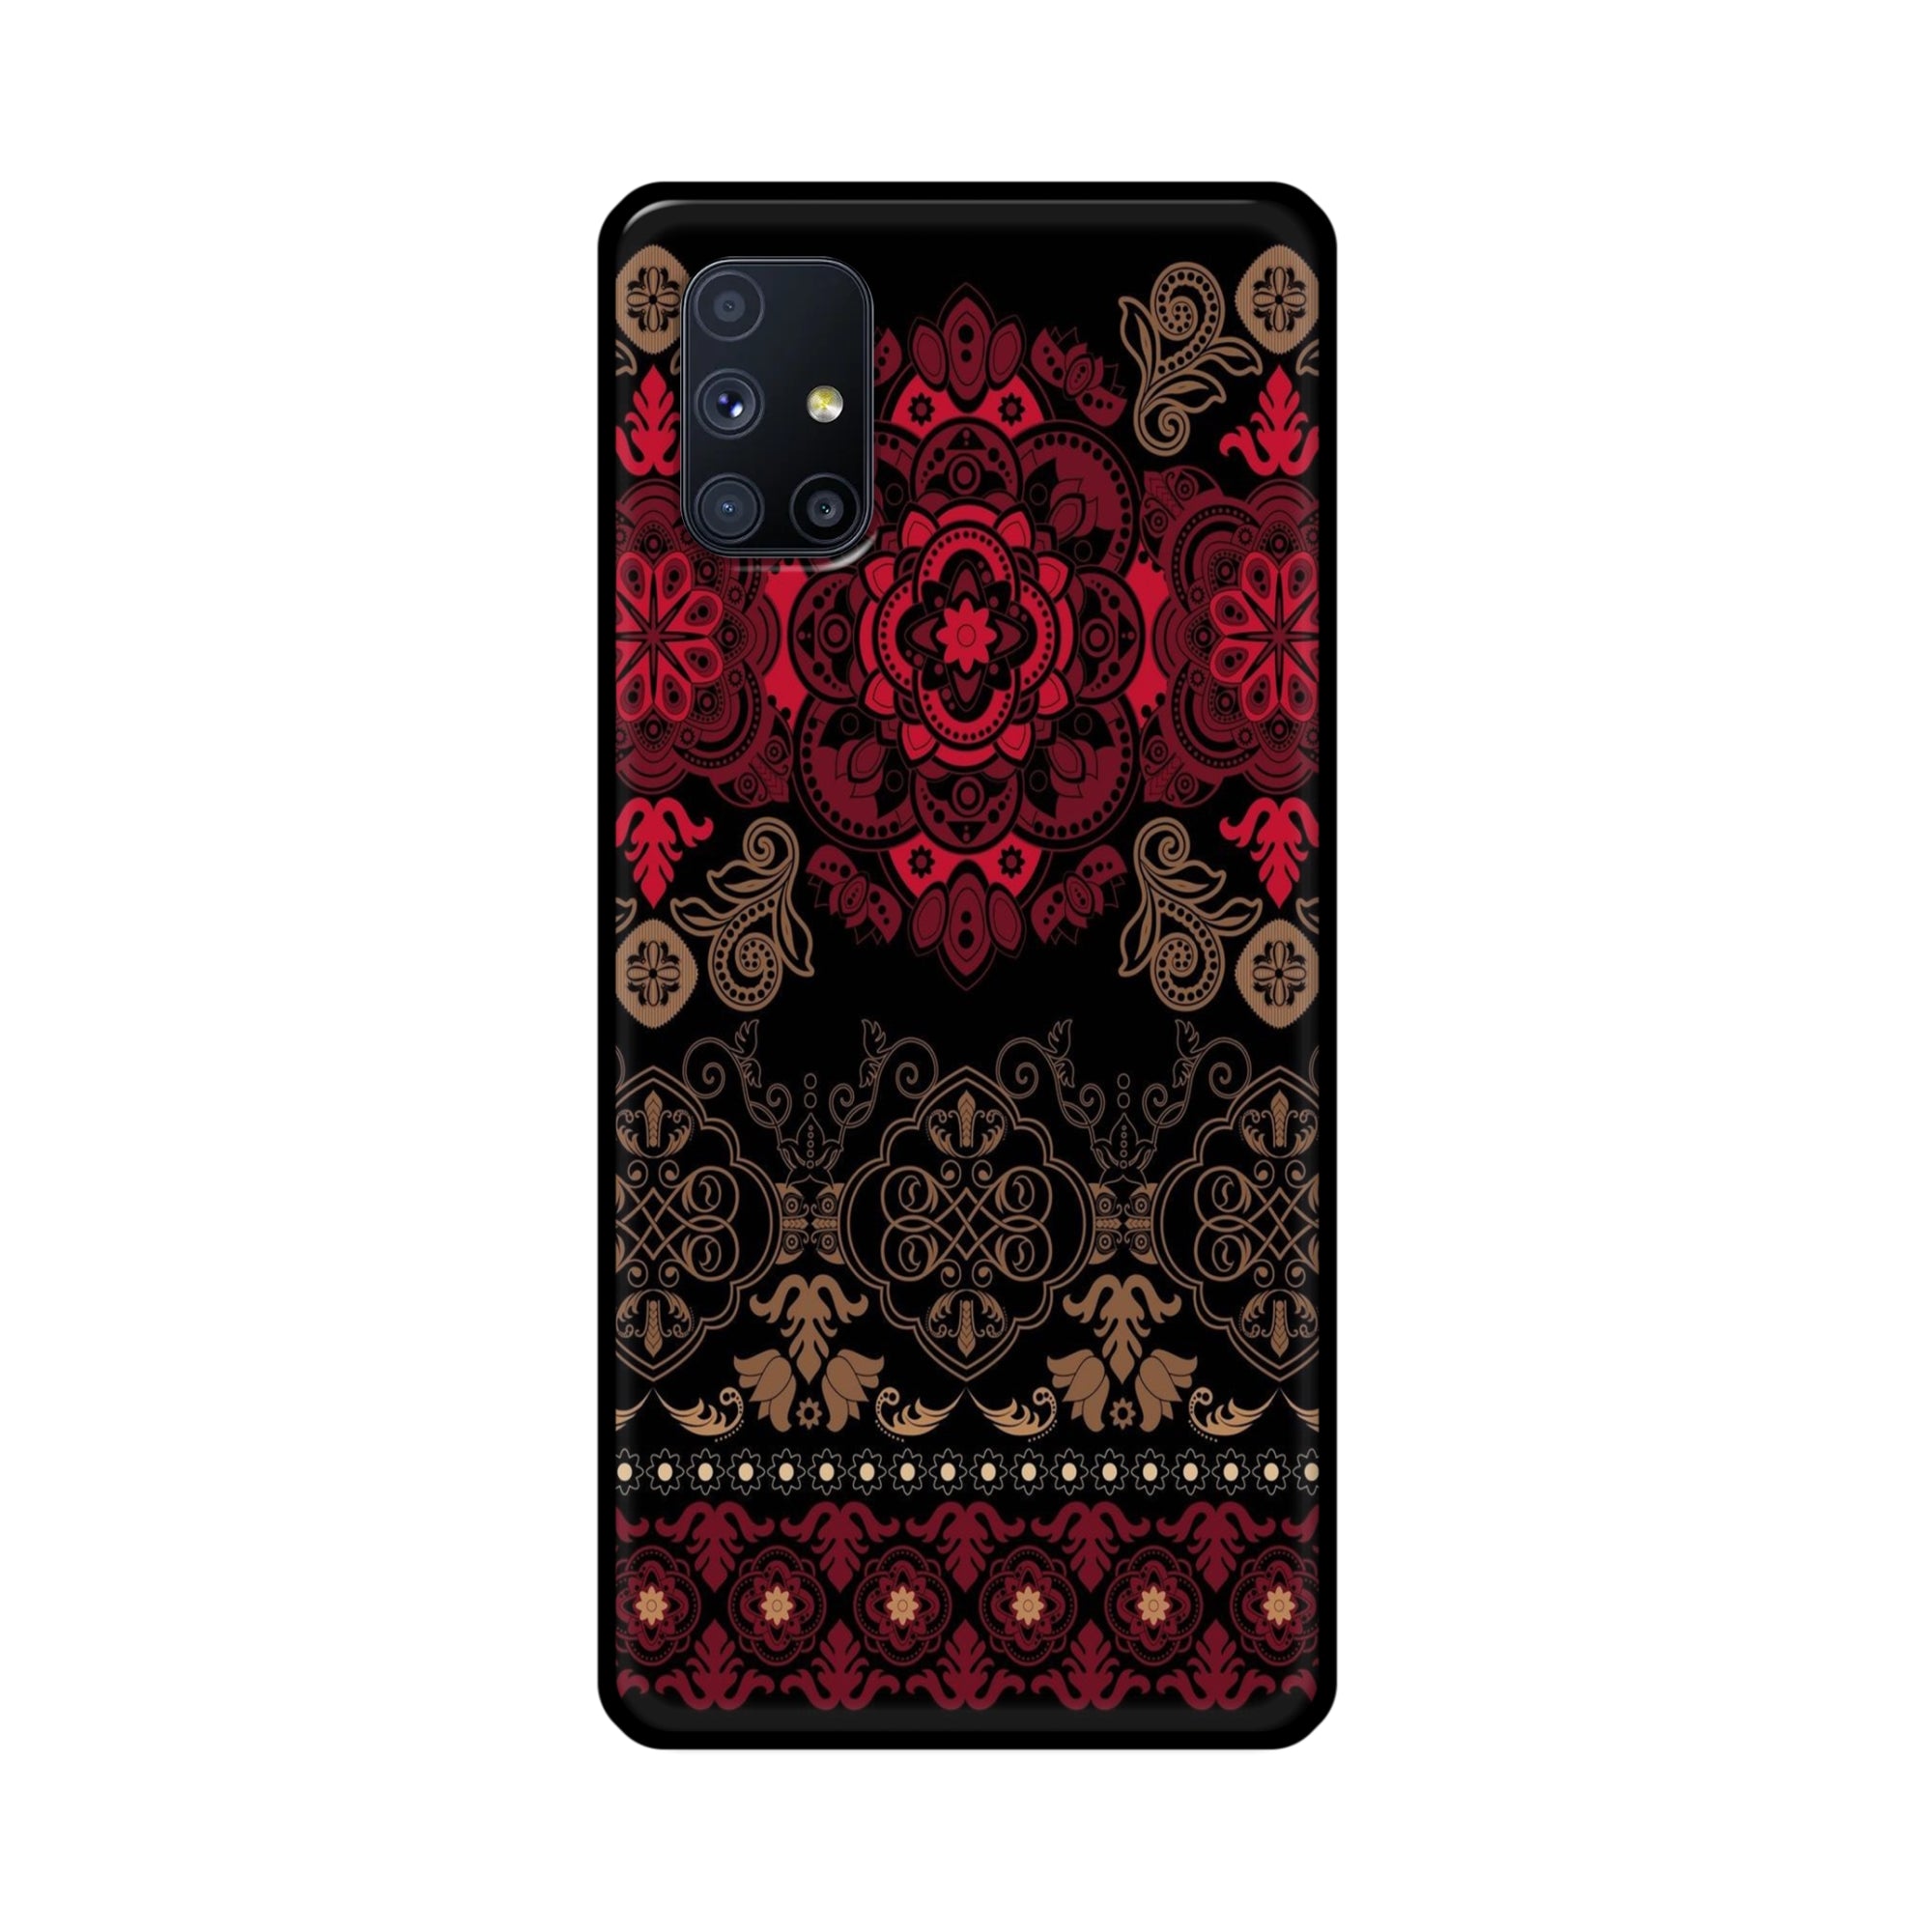 Buy Christian Mandalas Metal-Silicon Back Mobile Phone Case/Cover For Samsung Galaxy M51 Online